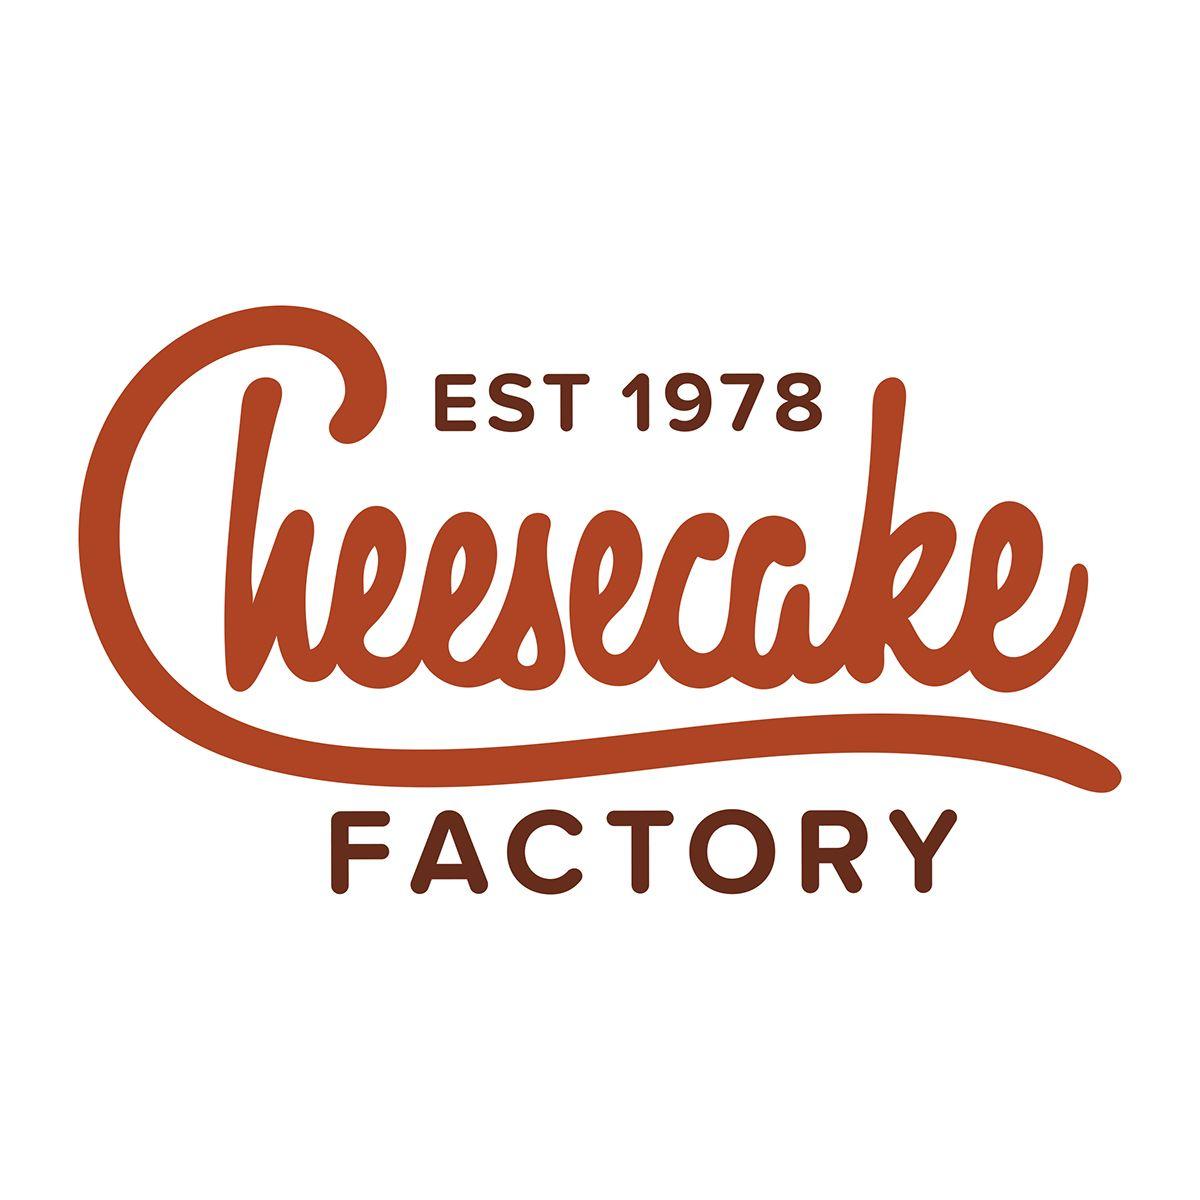 Cheesecake Factory Logo - The Cheesecake Factory Redesign Project on Behance